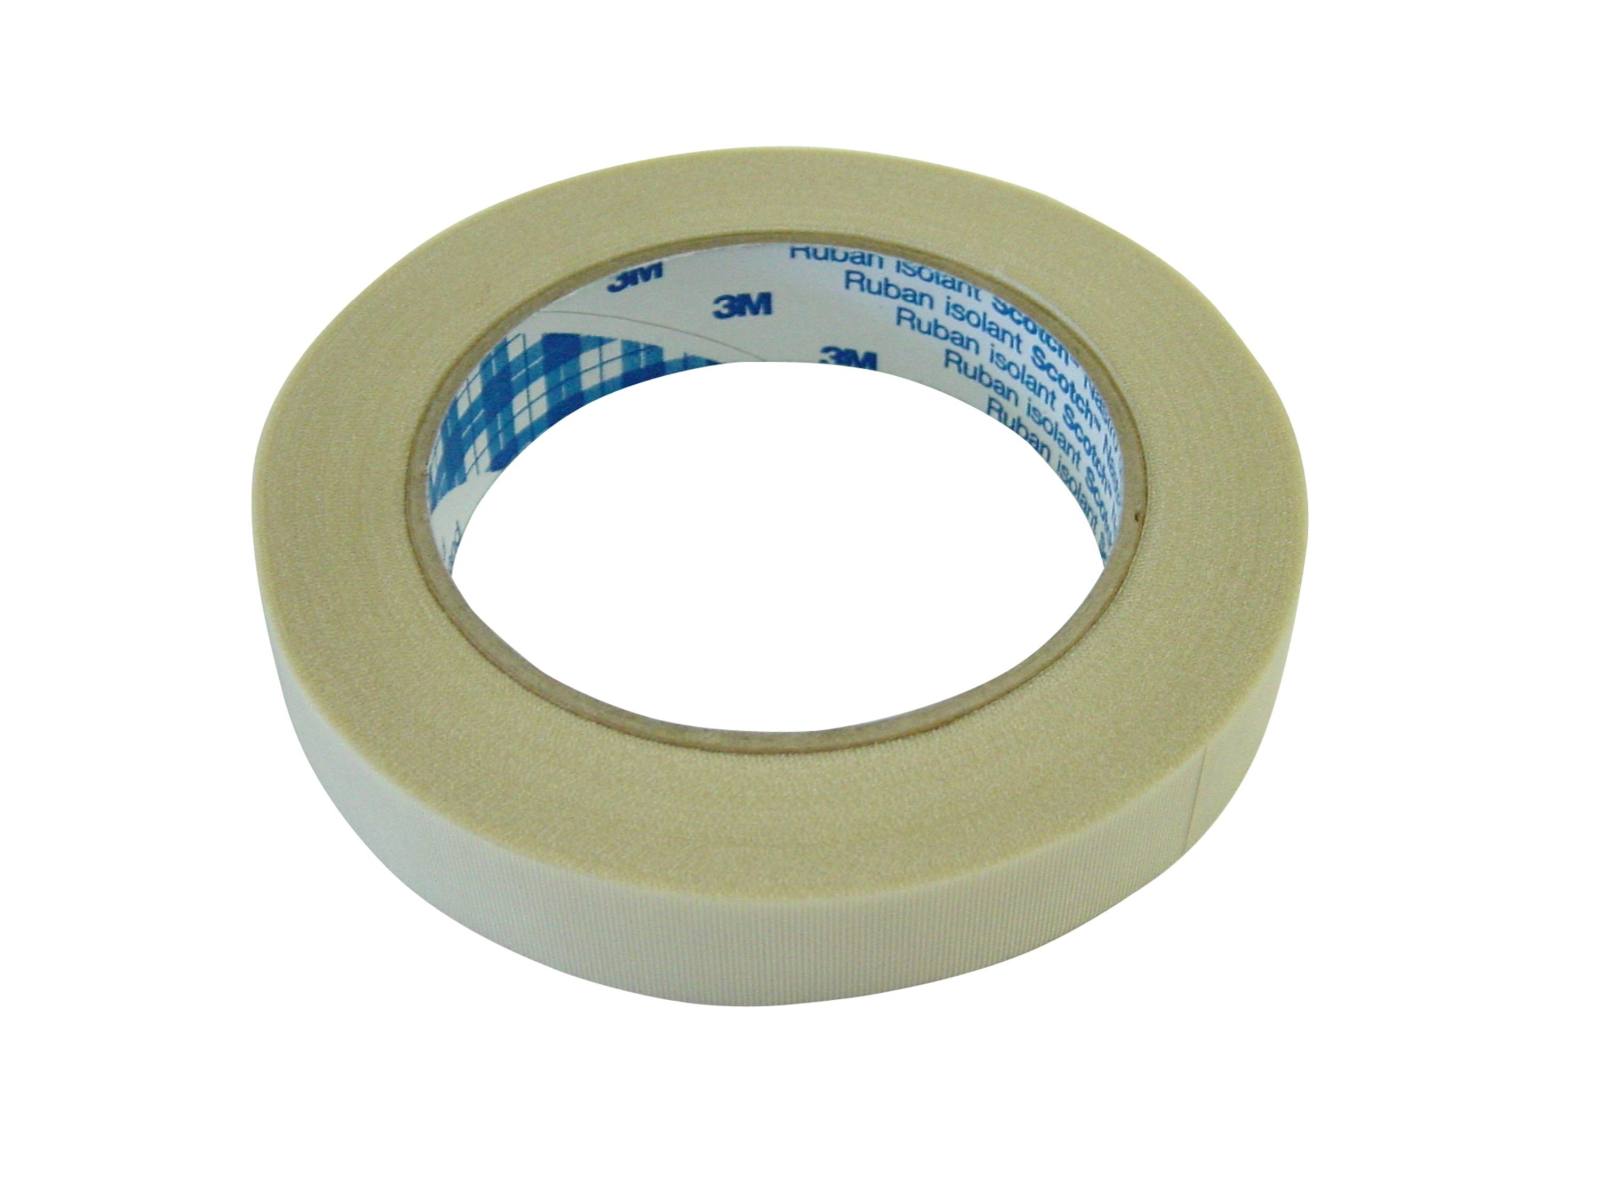 3M ET 69 Glasweefselband, wit, 1219 mm x 33 m x 0,18 mm